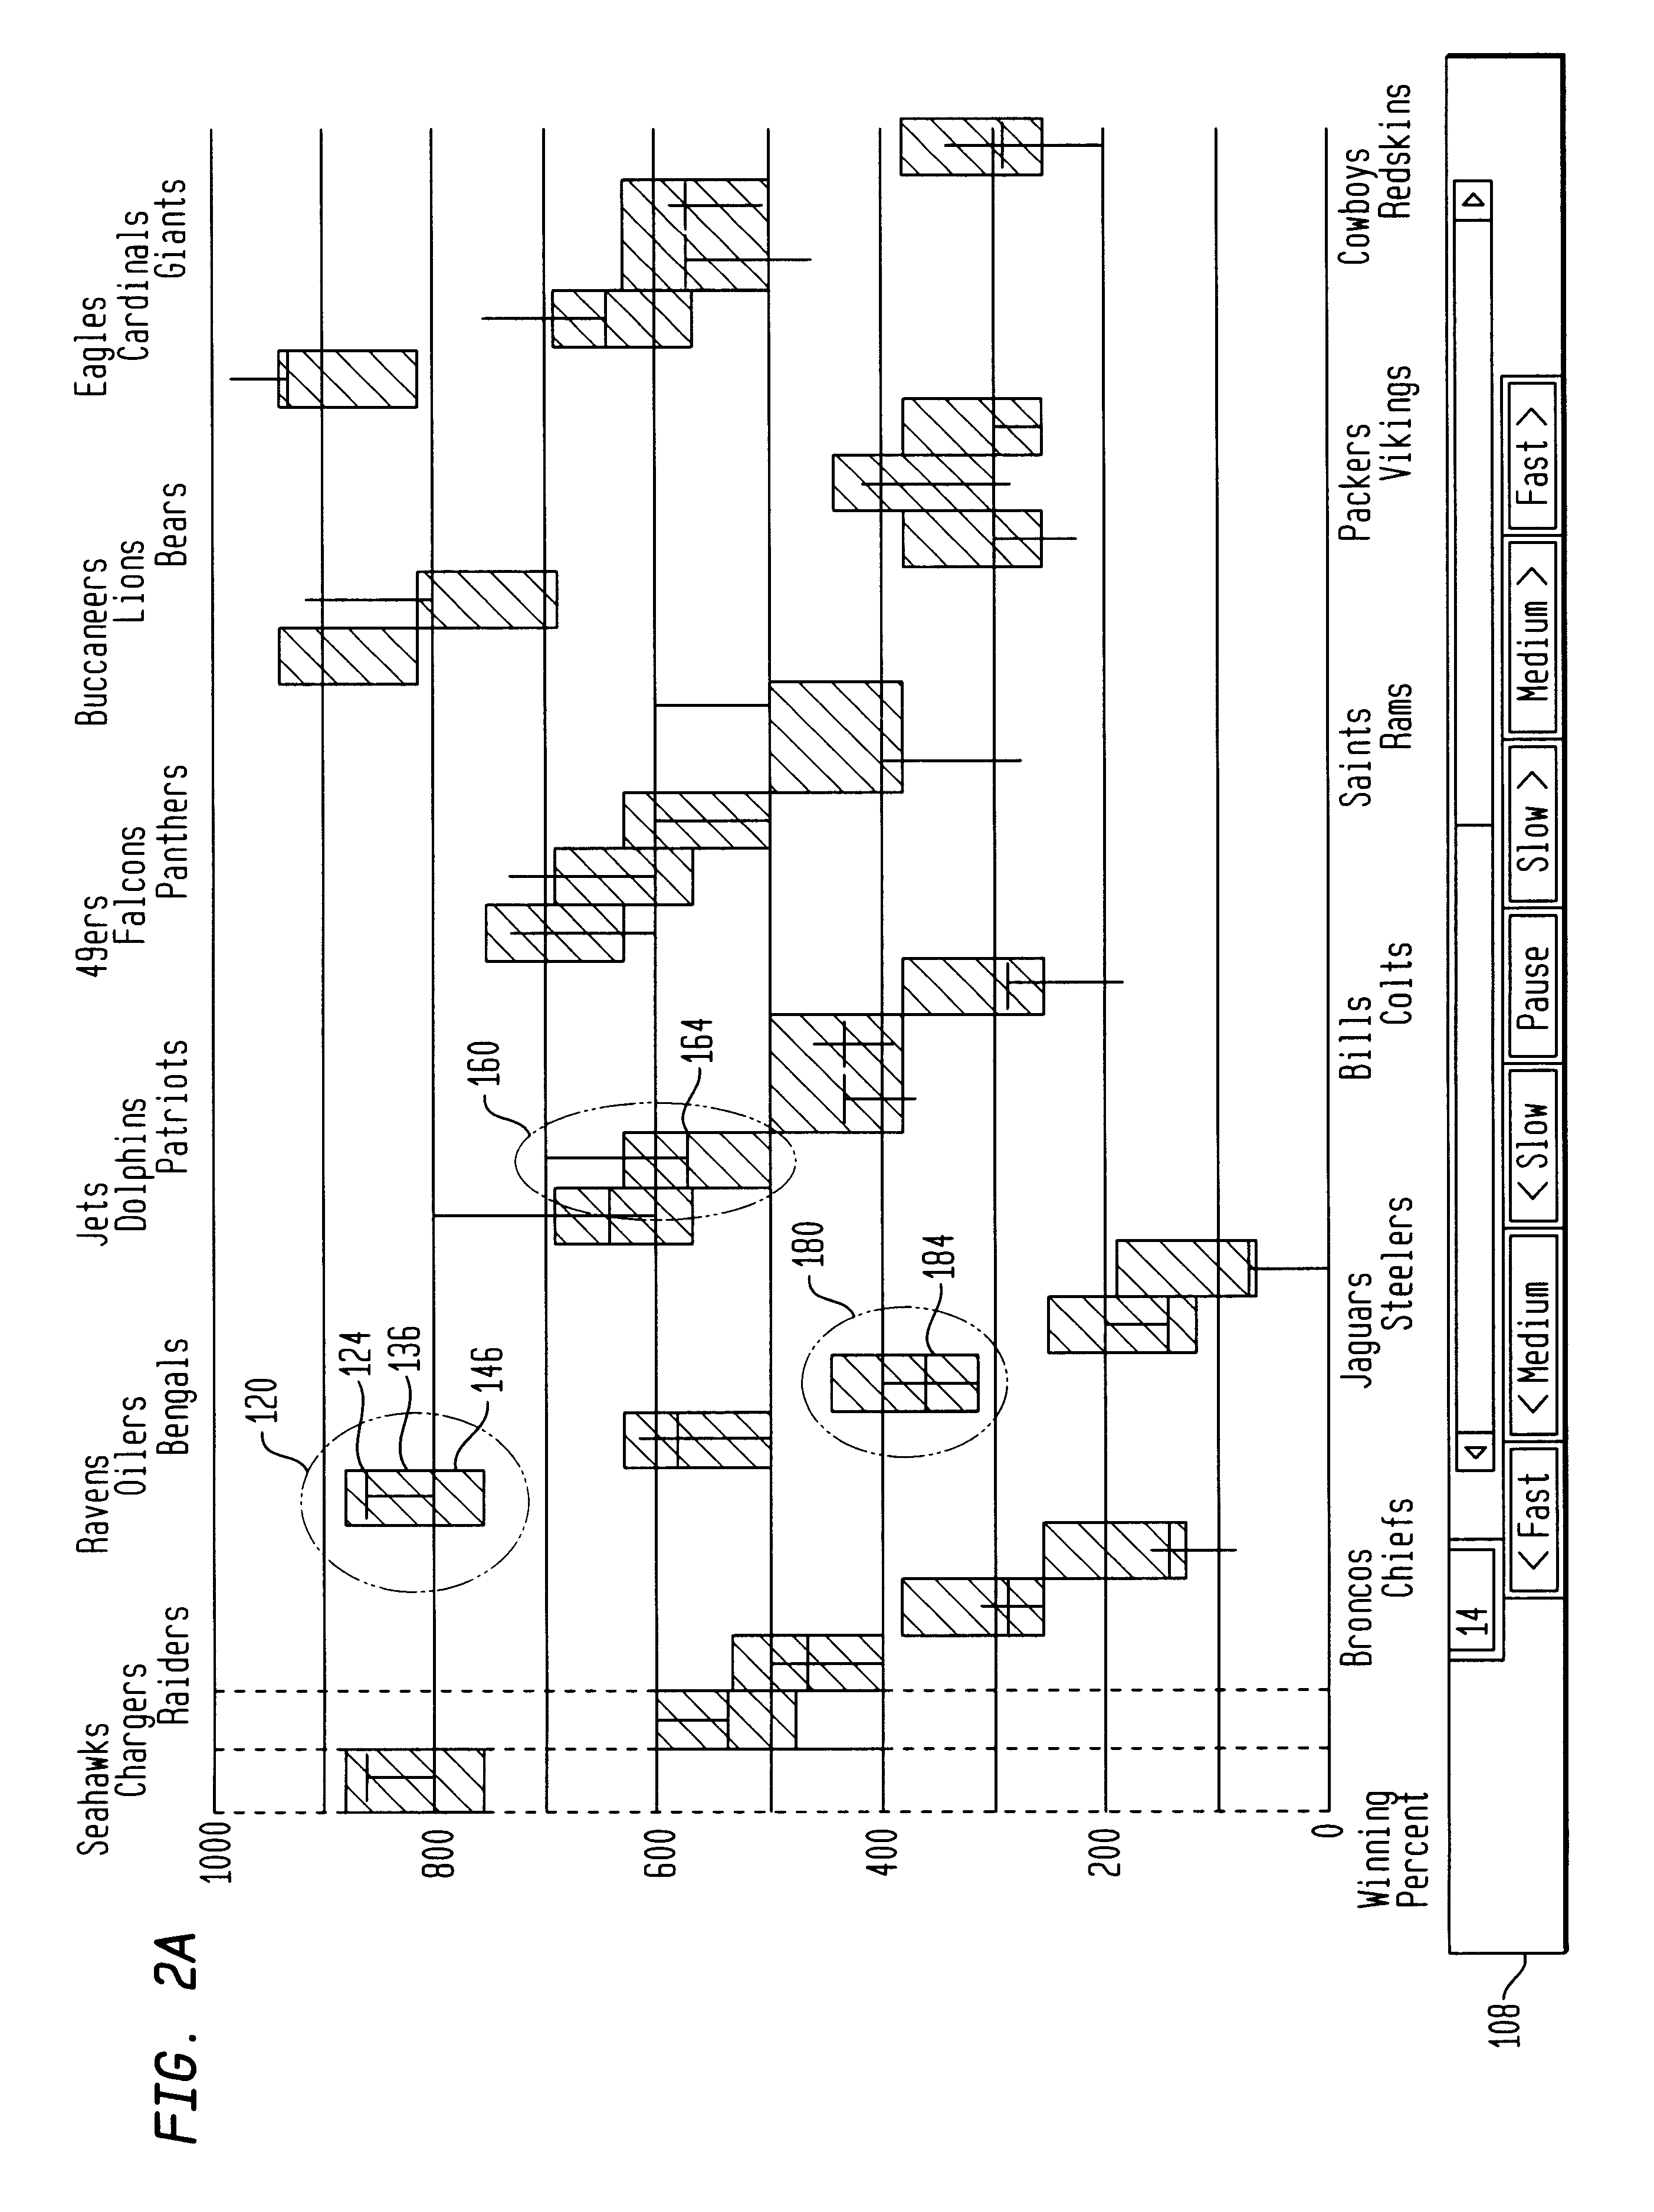 Method and apparatus for graphically representing information stored in electronic media